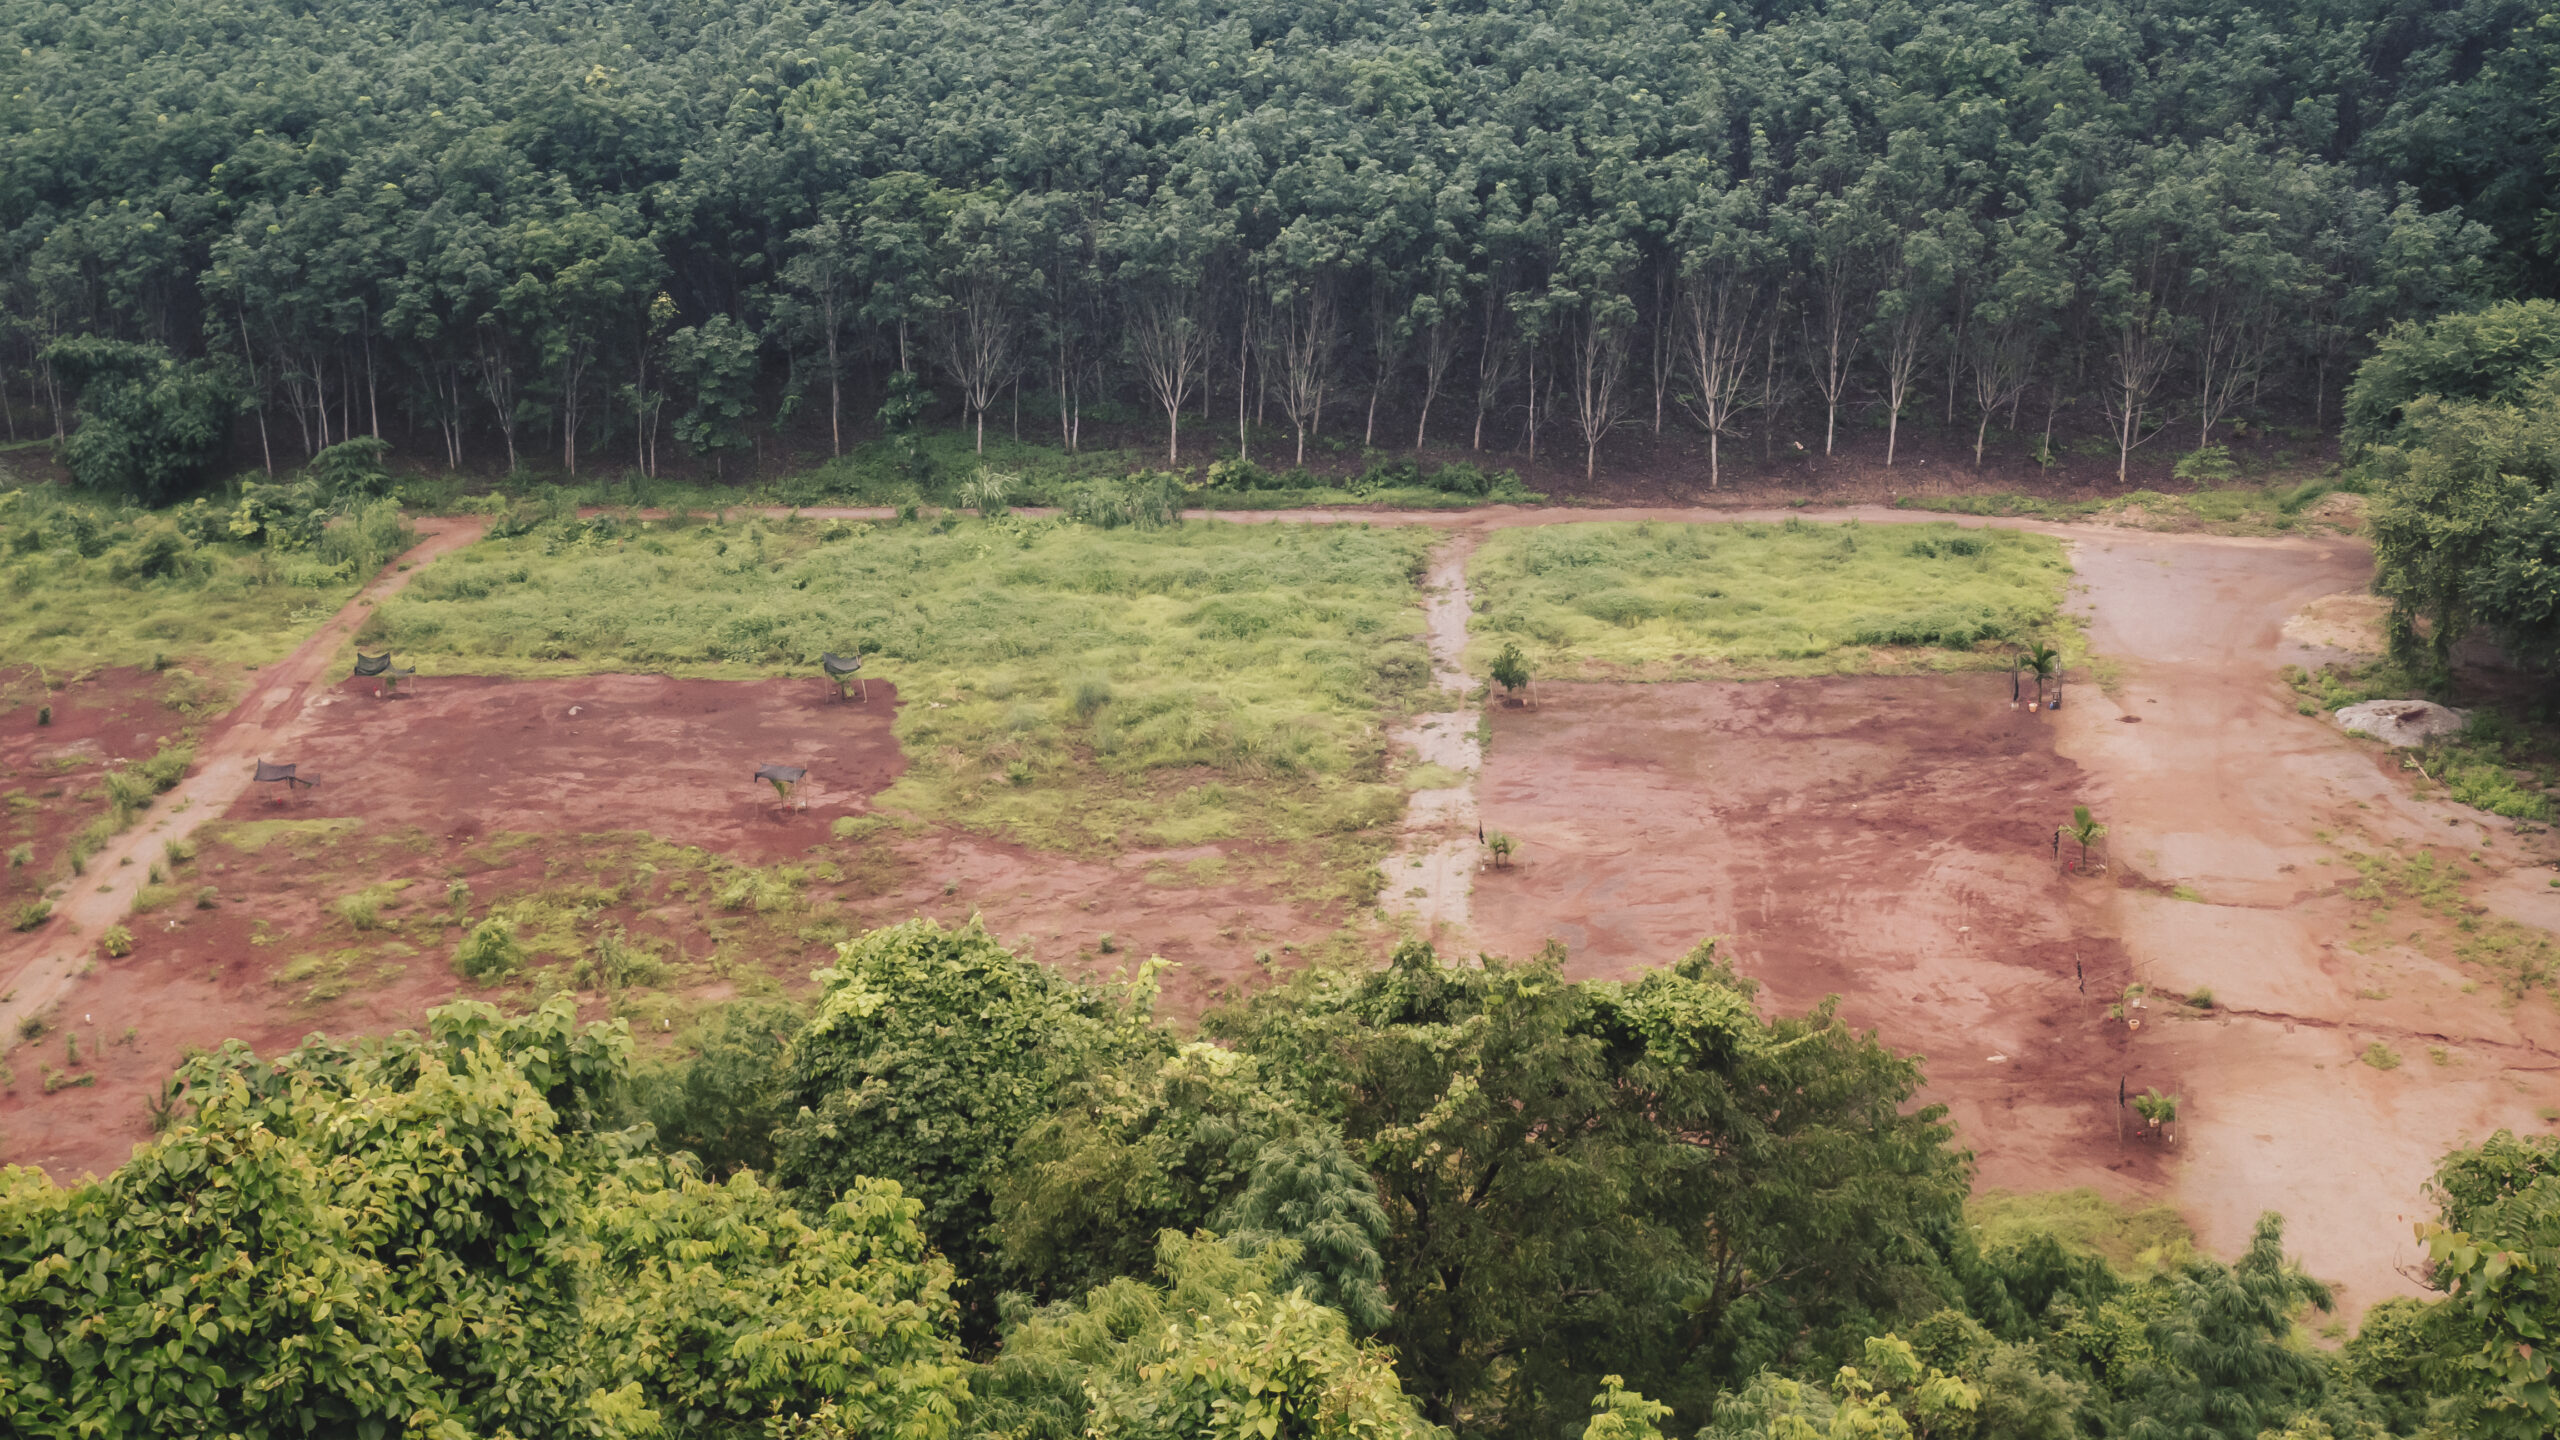 Deforestation: Scarred earth where tropical rain forest has been destroyed by human development